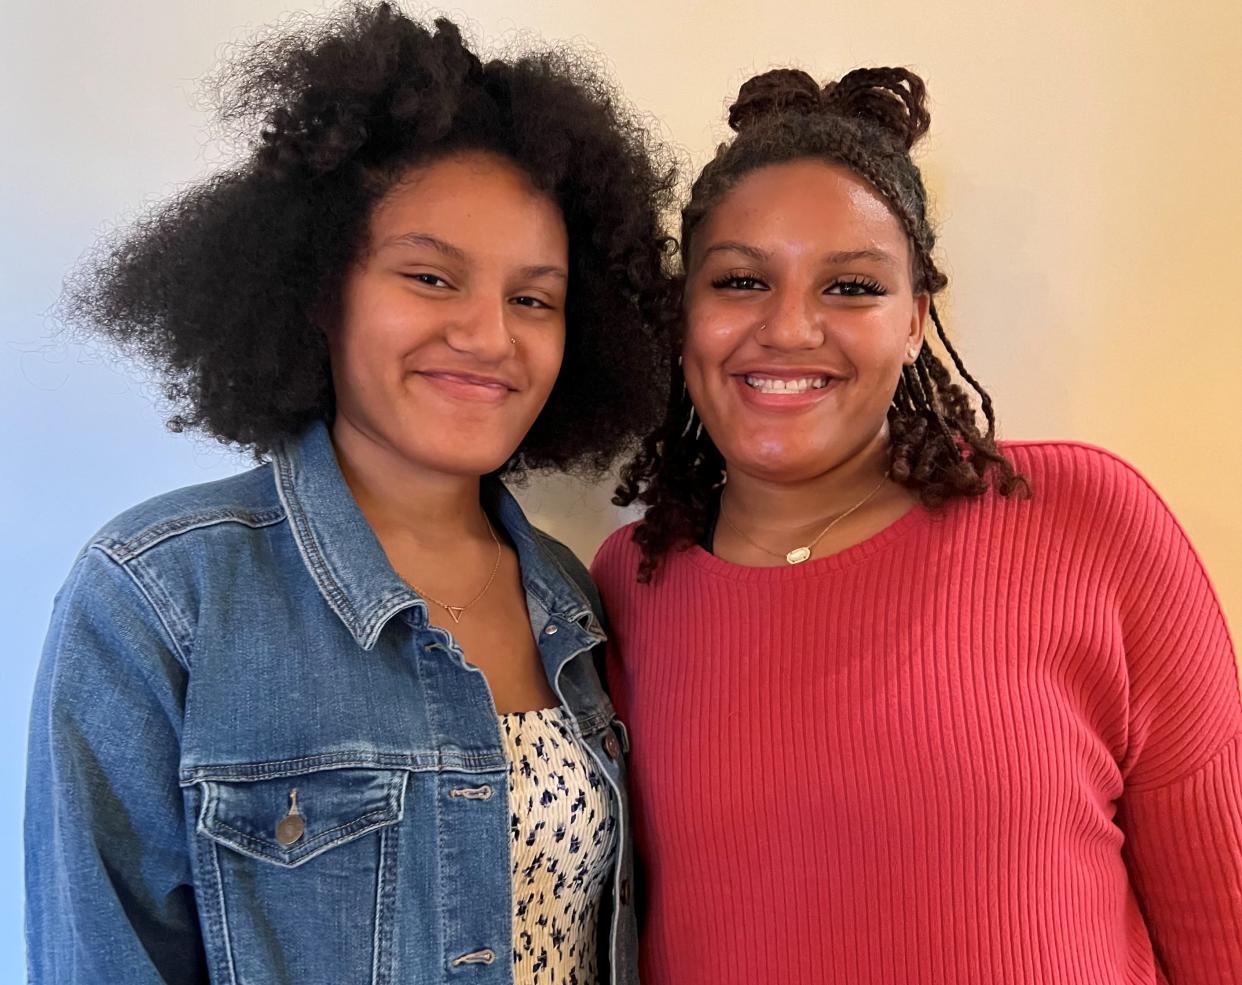 2023 Bayshore High School graduates Ariel Samedi and Anastasia Samedi will be honored with the Rising Stars Award at the 38th annual Sarasota County NAACP Freedom Awards banquet on Oct. 5 at the Hyatt Regency Sarasota.